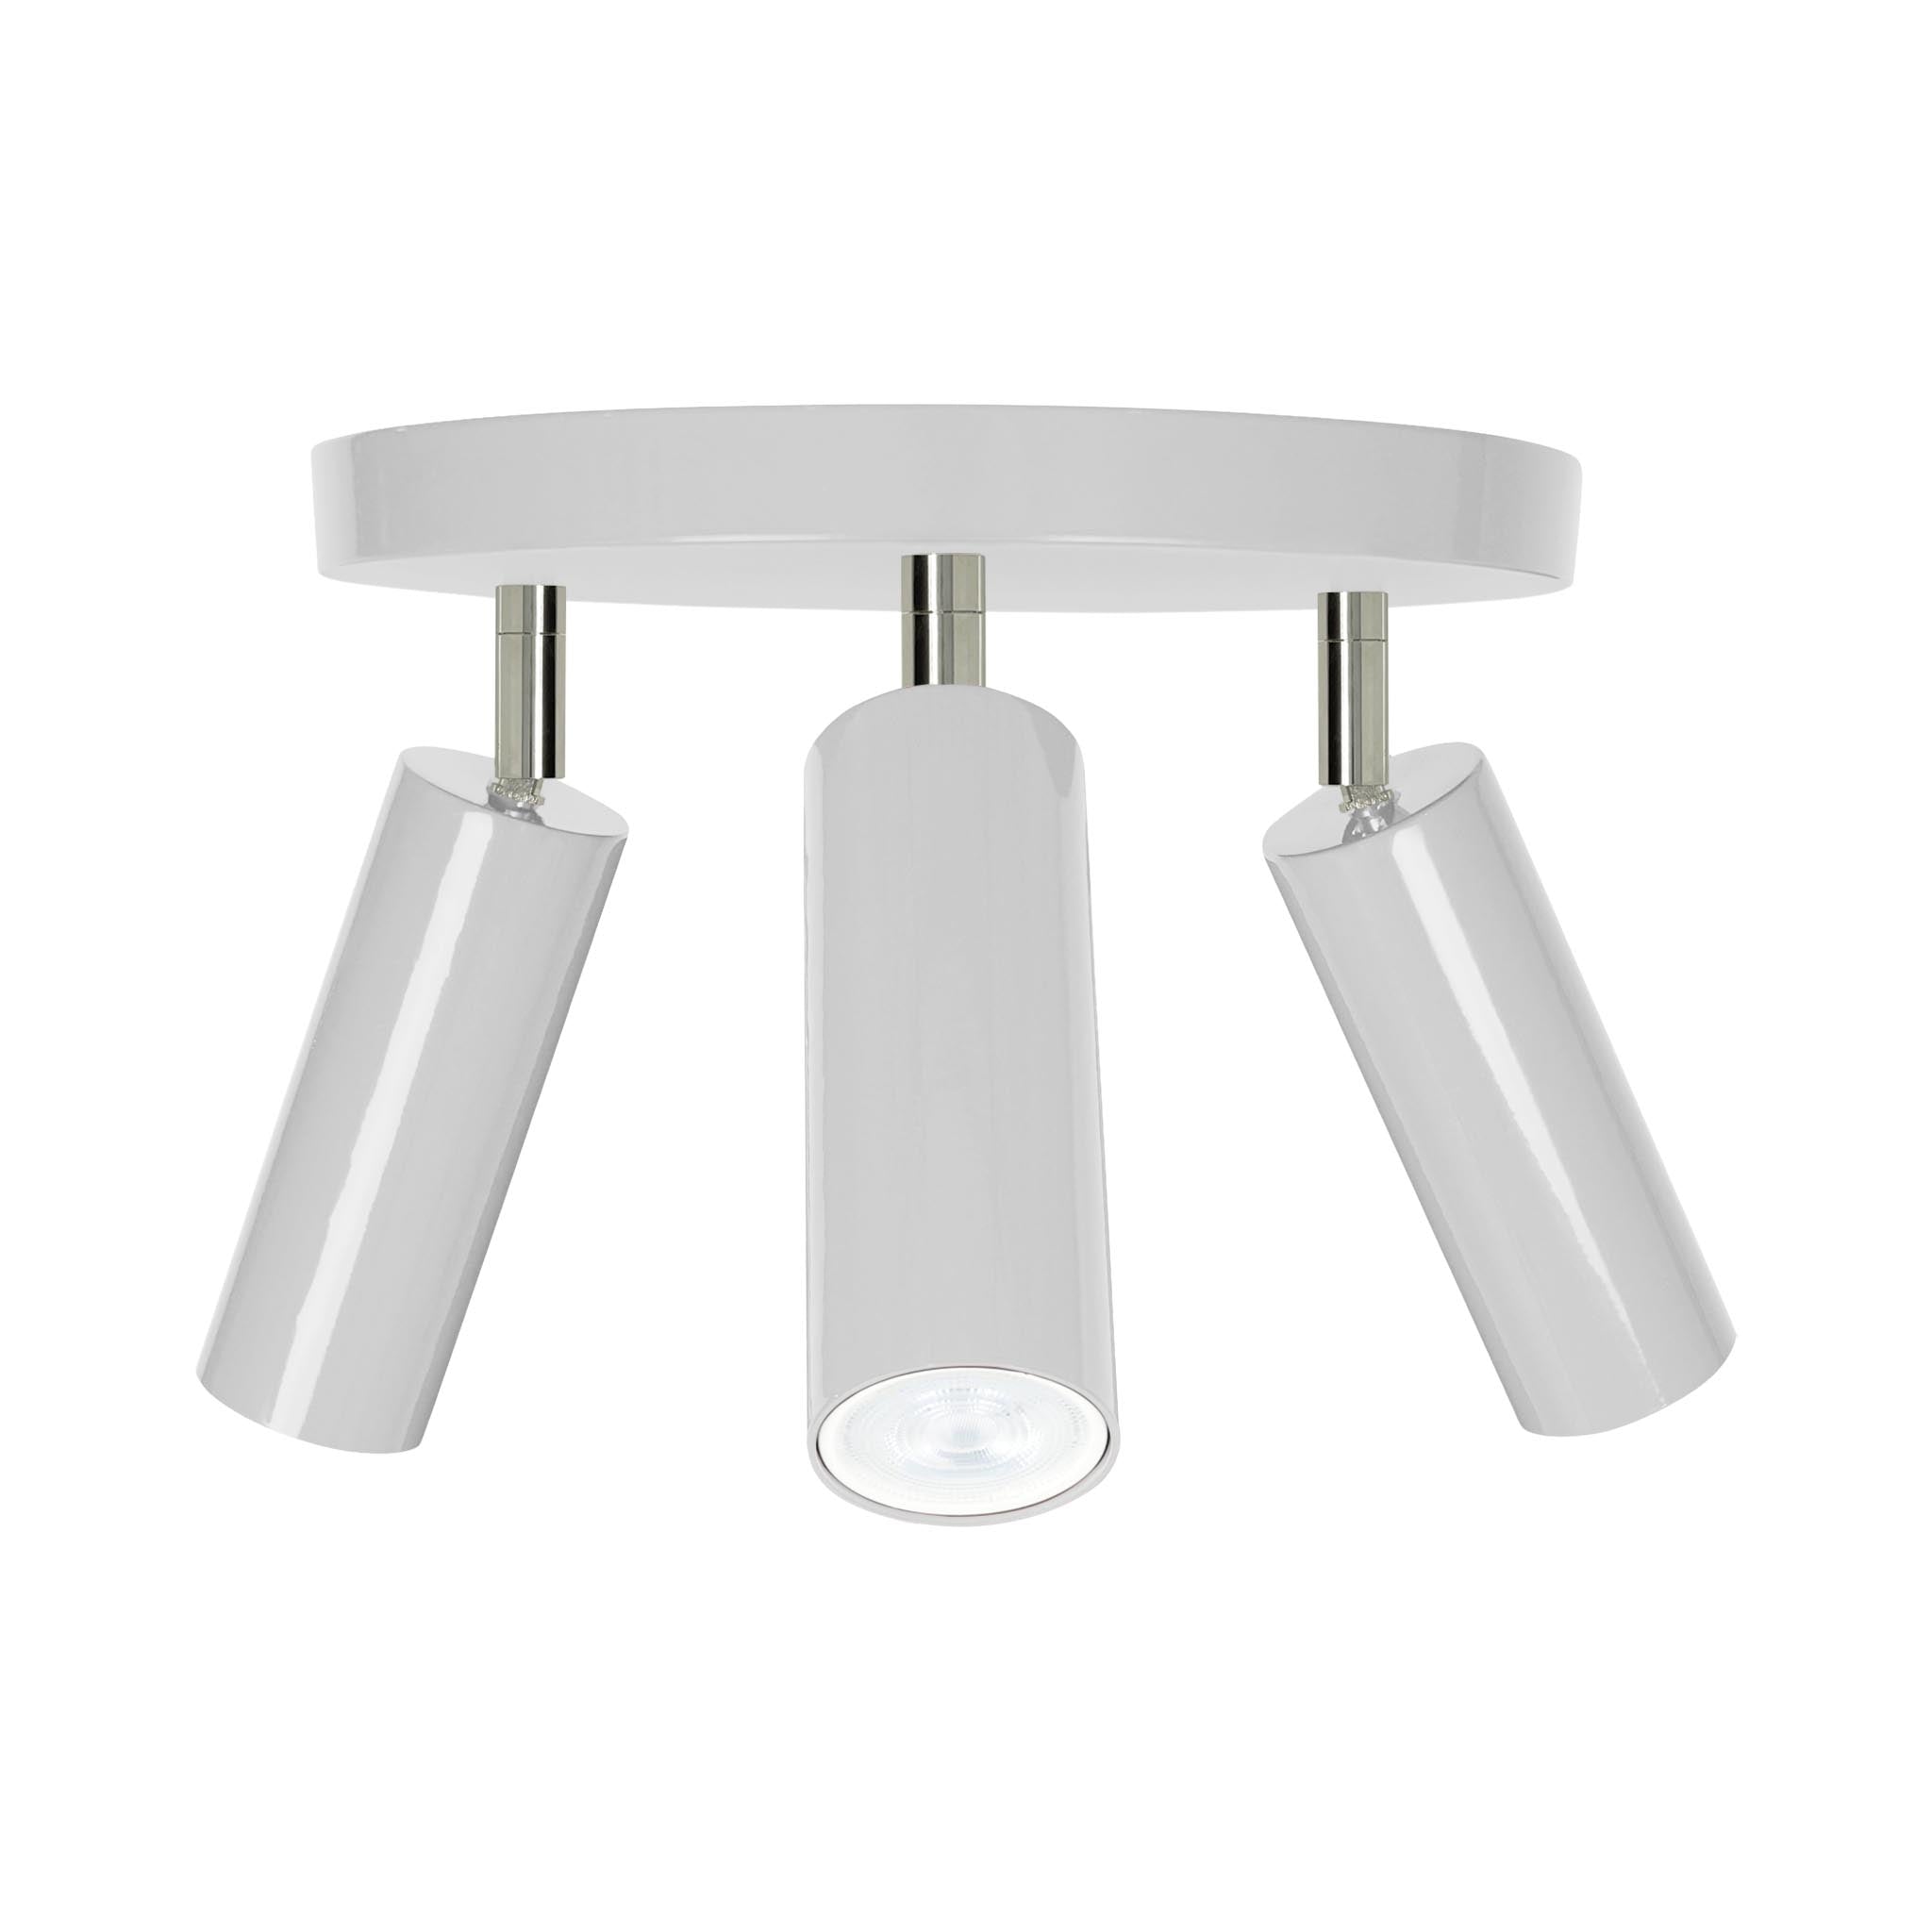 Nickel and chalk color Pose flush mount Dutton Brown lighting